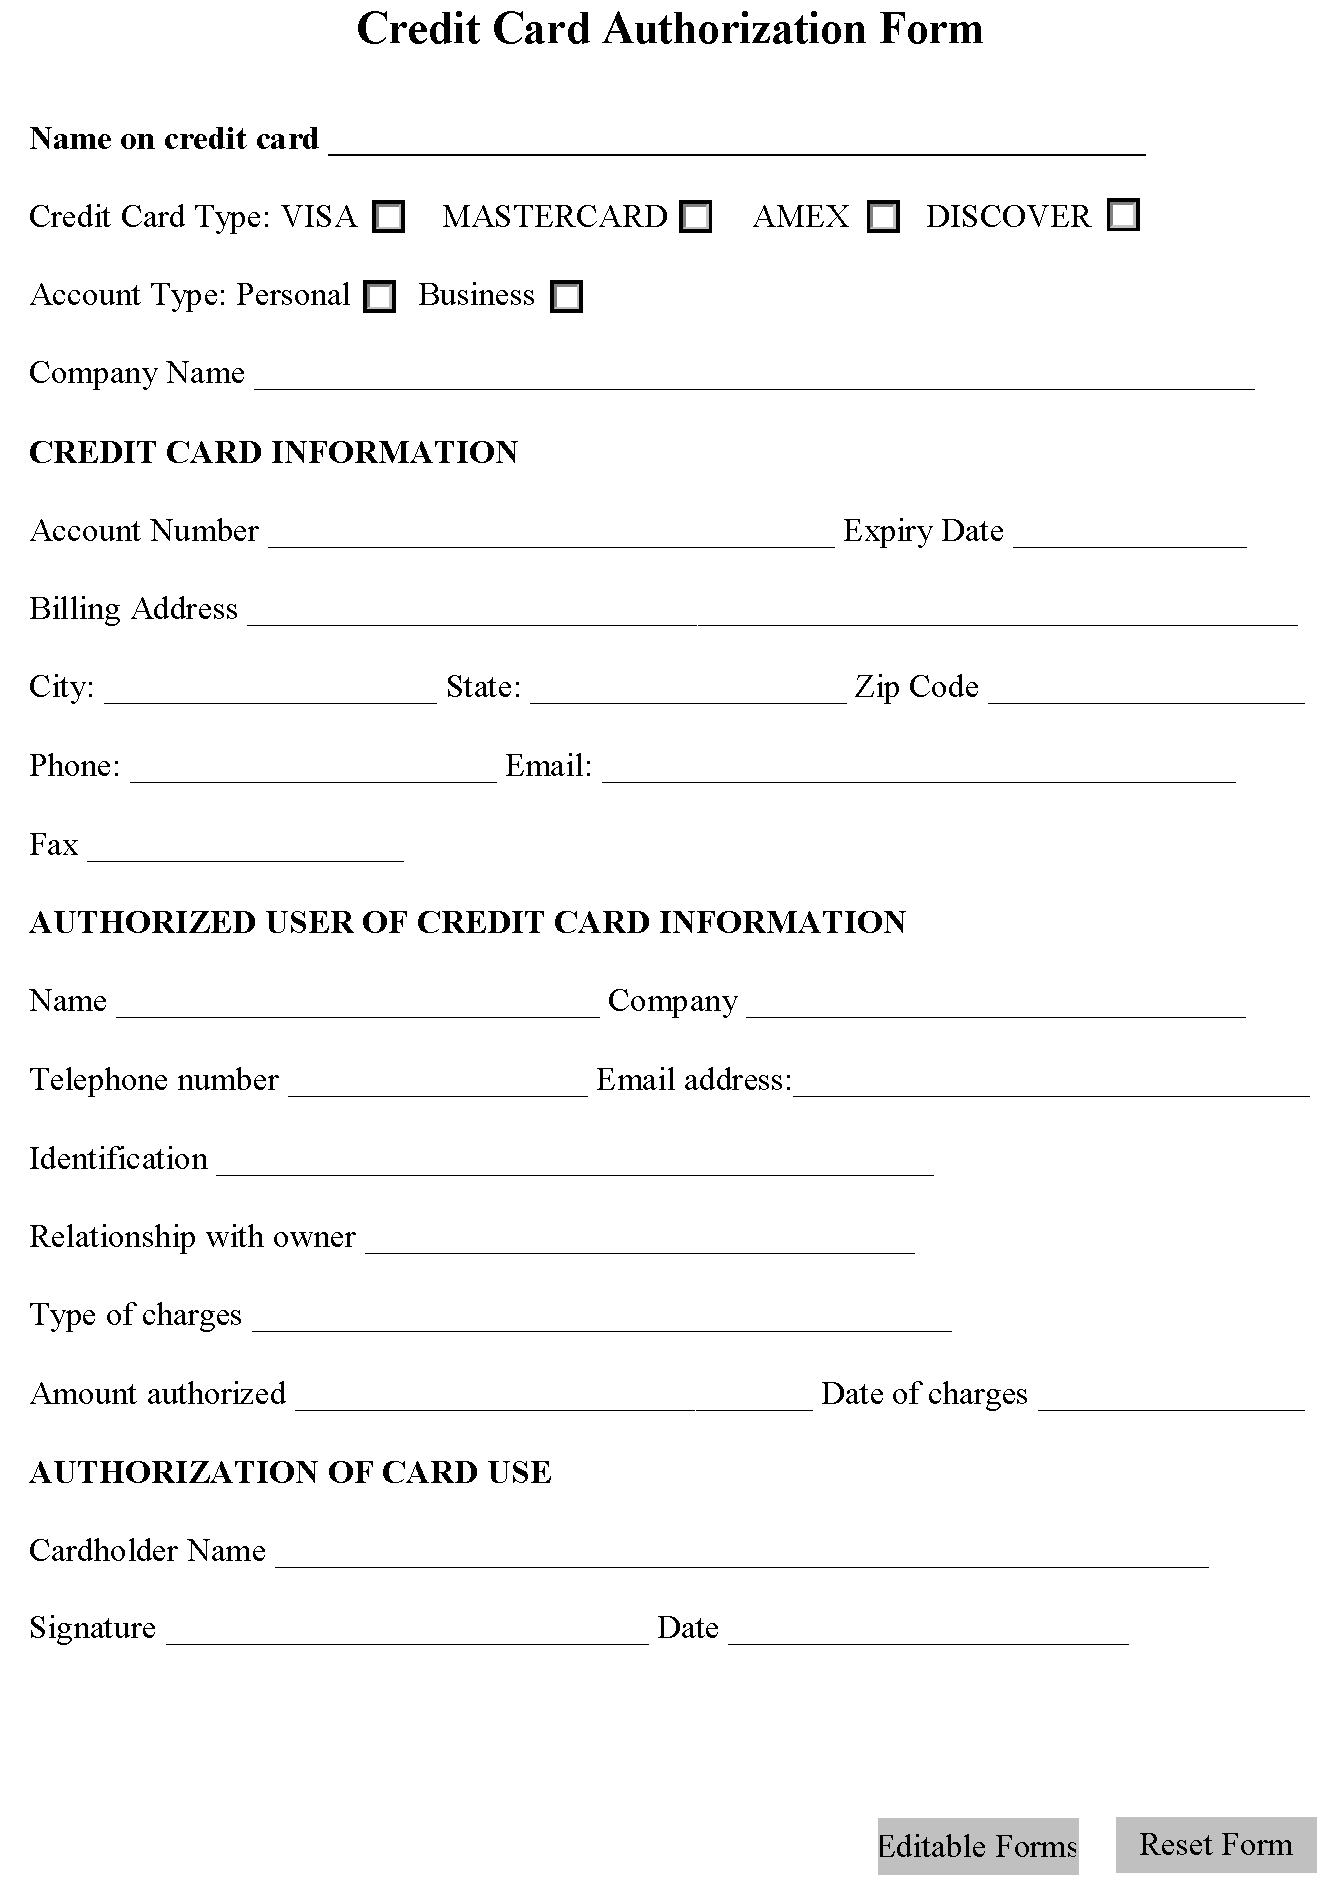 Credit Card Authorization Form | Editable Forms In Credit Card Authorization Form Template Word